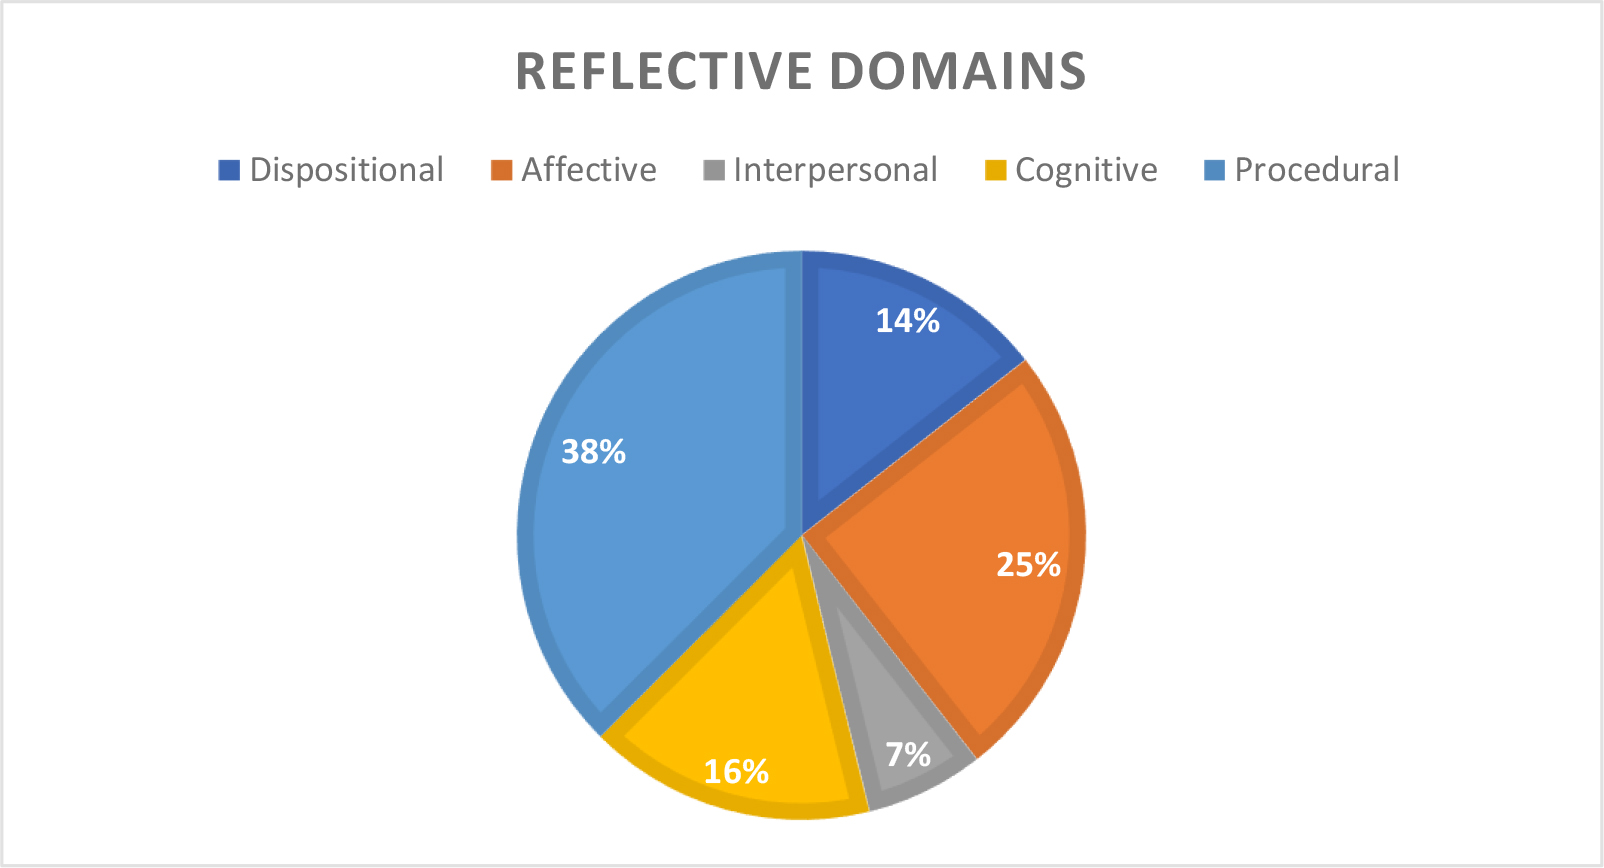 Pie chart data of the reflective domains: Dispositional 14%, Affective 25%, Interpersonal 7%, Cognitive 16%, Procedural 38%.